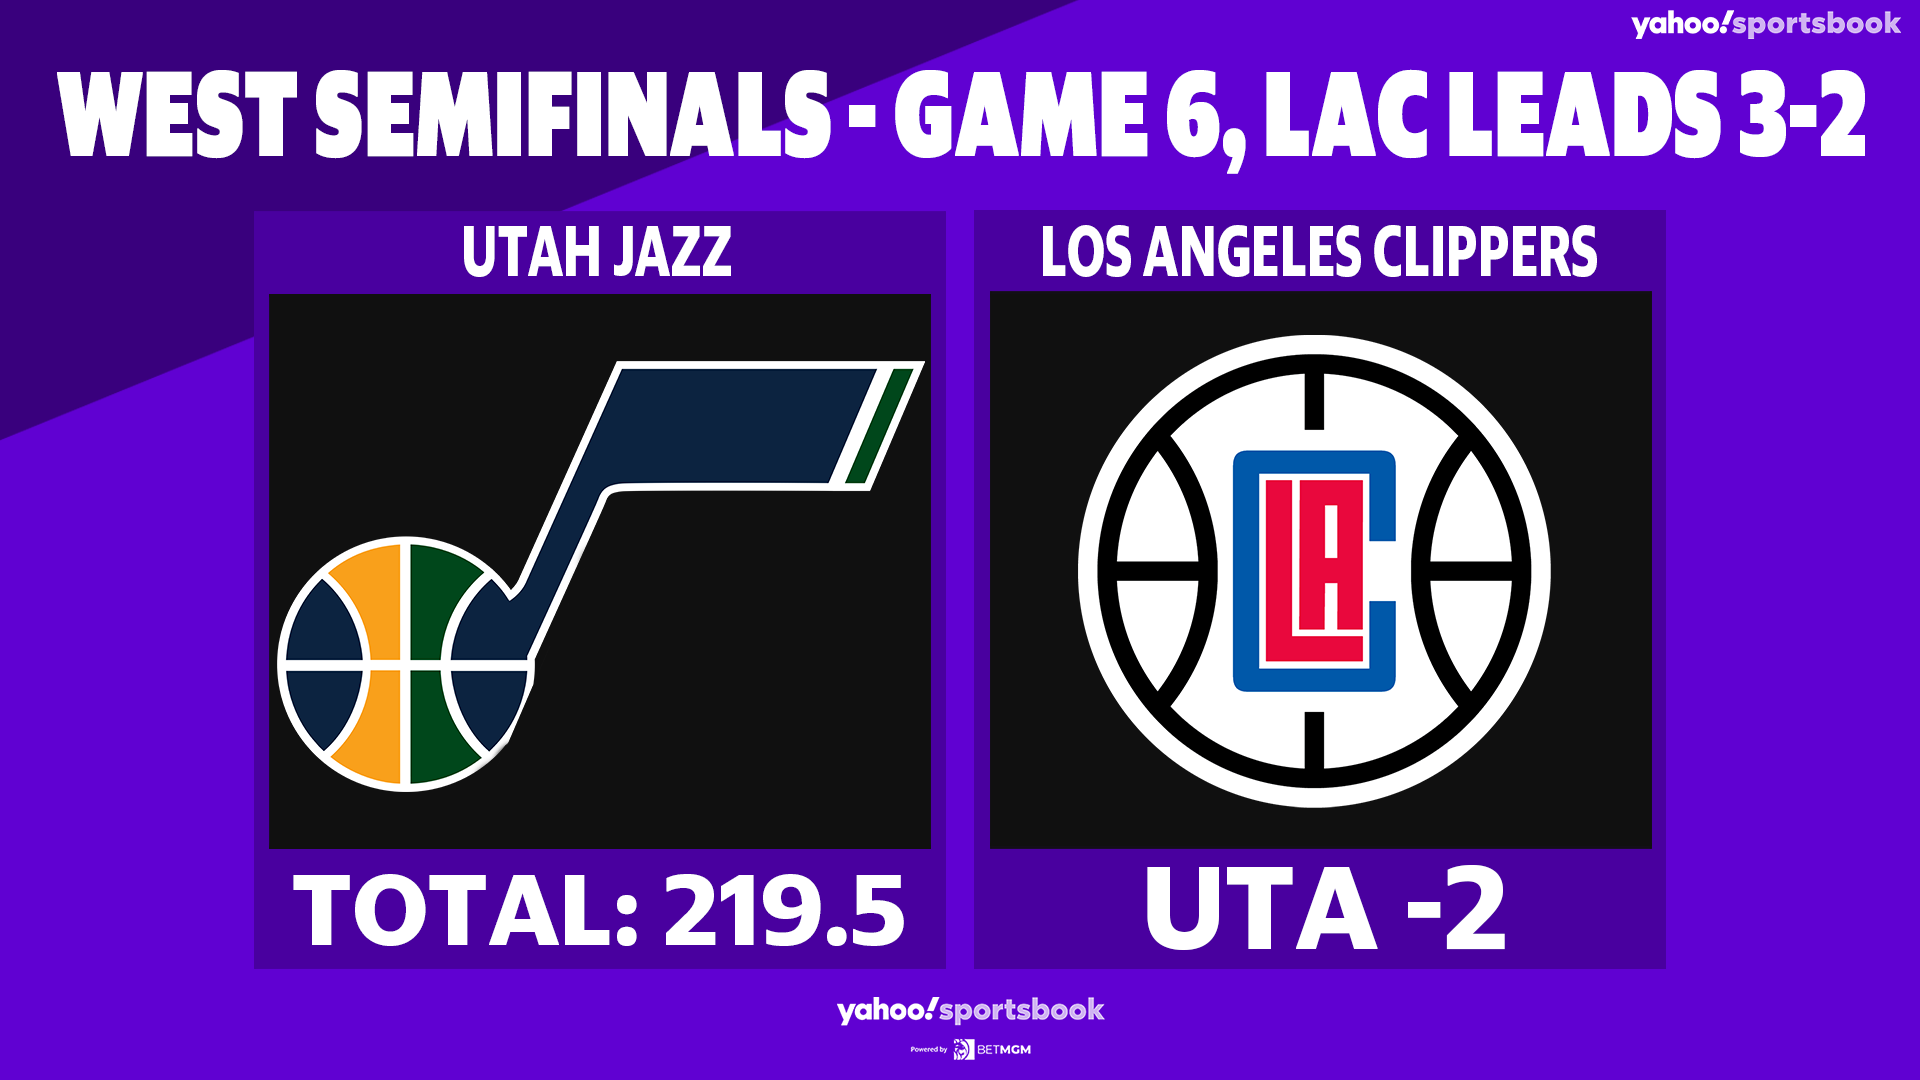 Clippers Vs Jazz Scores : Clippers make history with Terance Mann